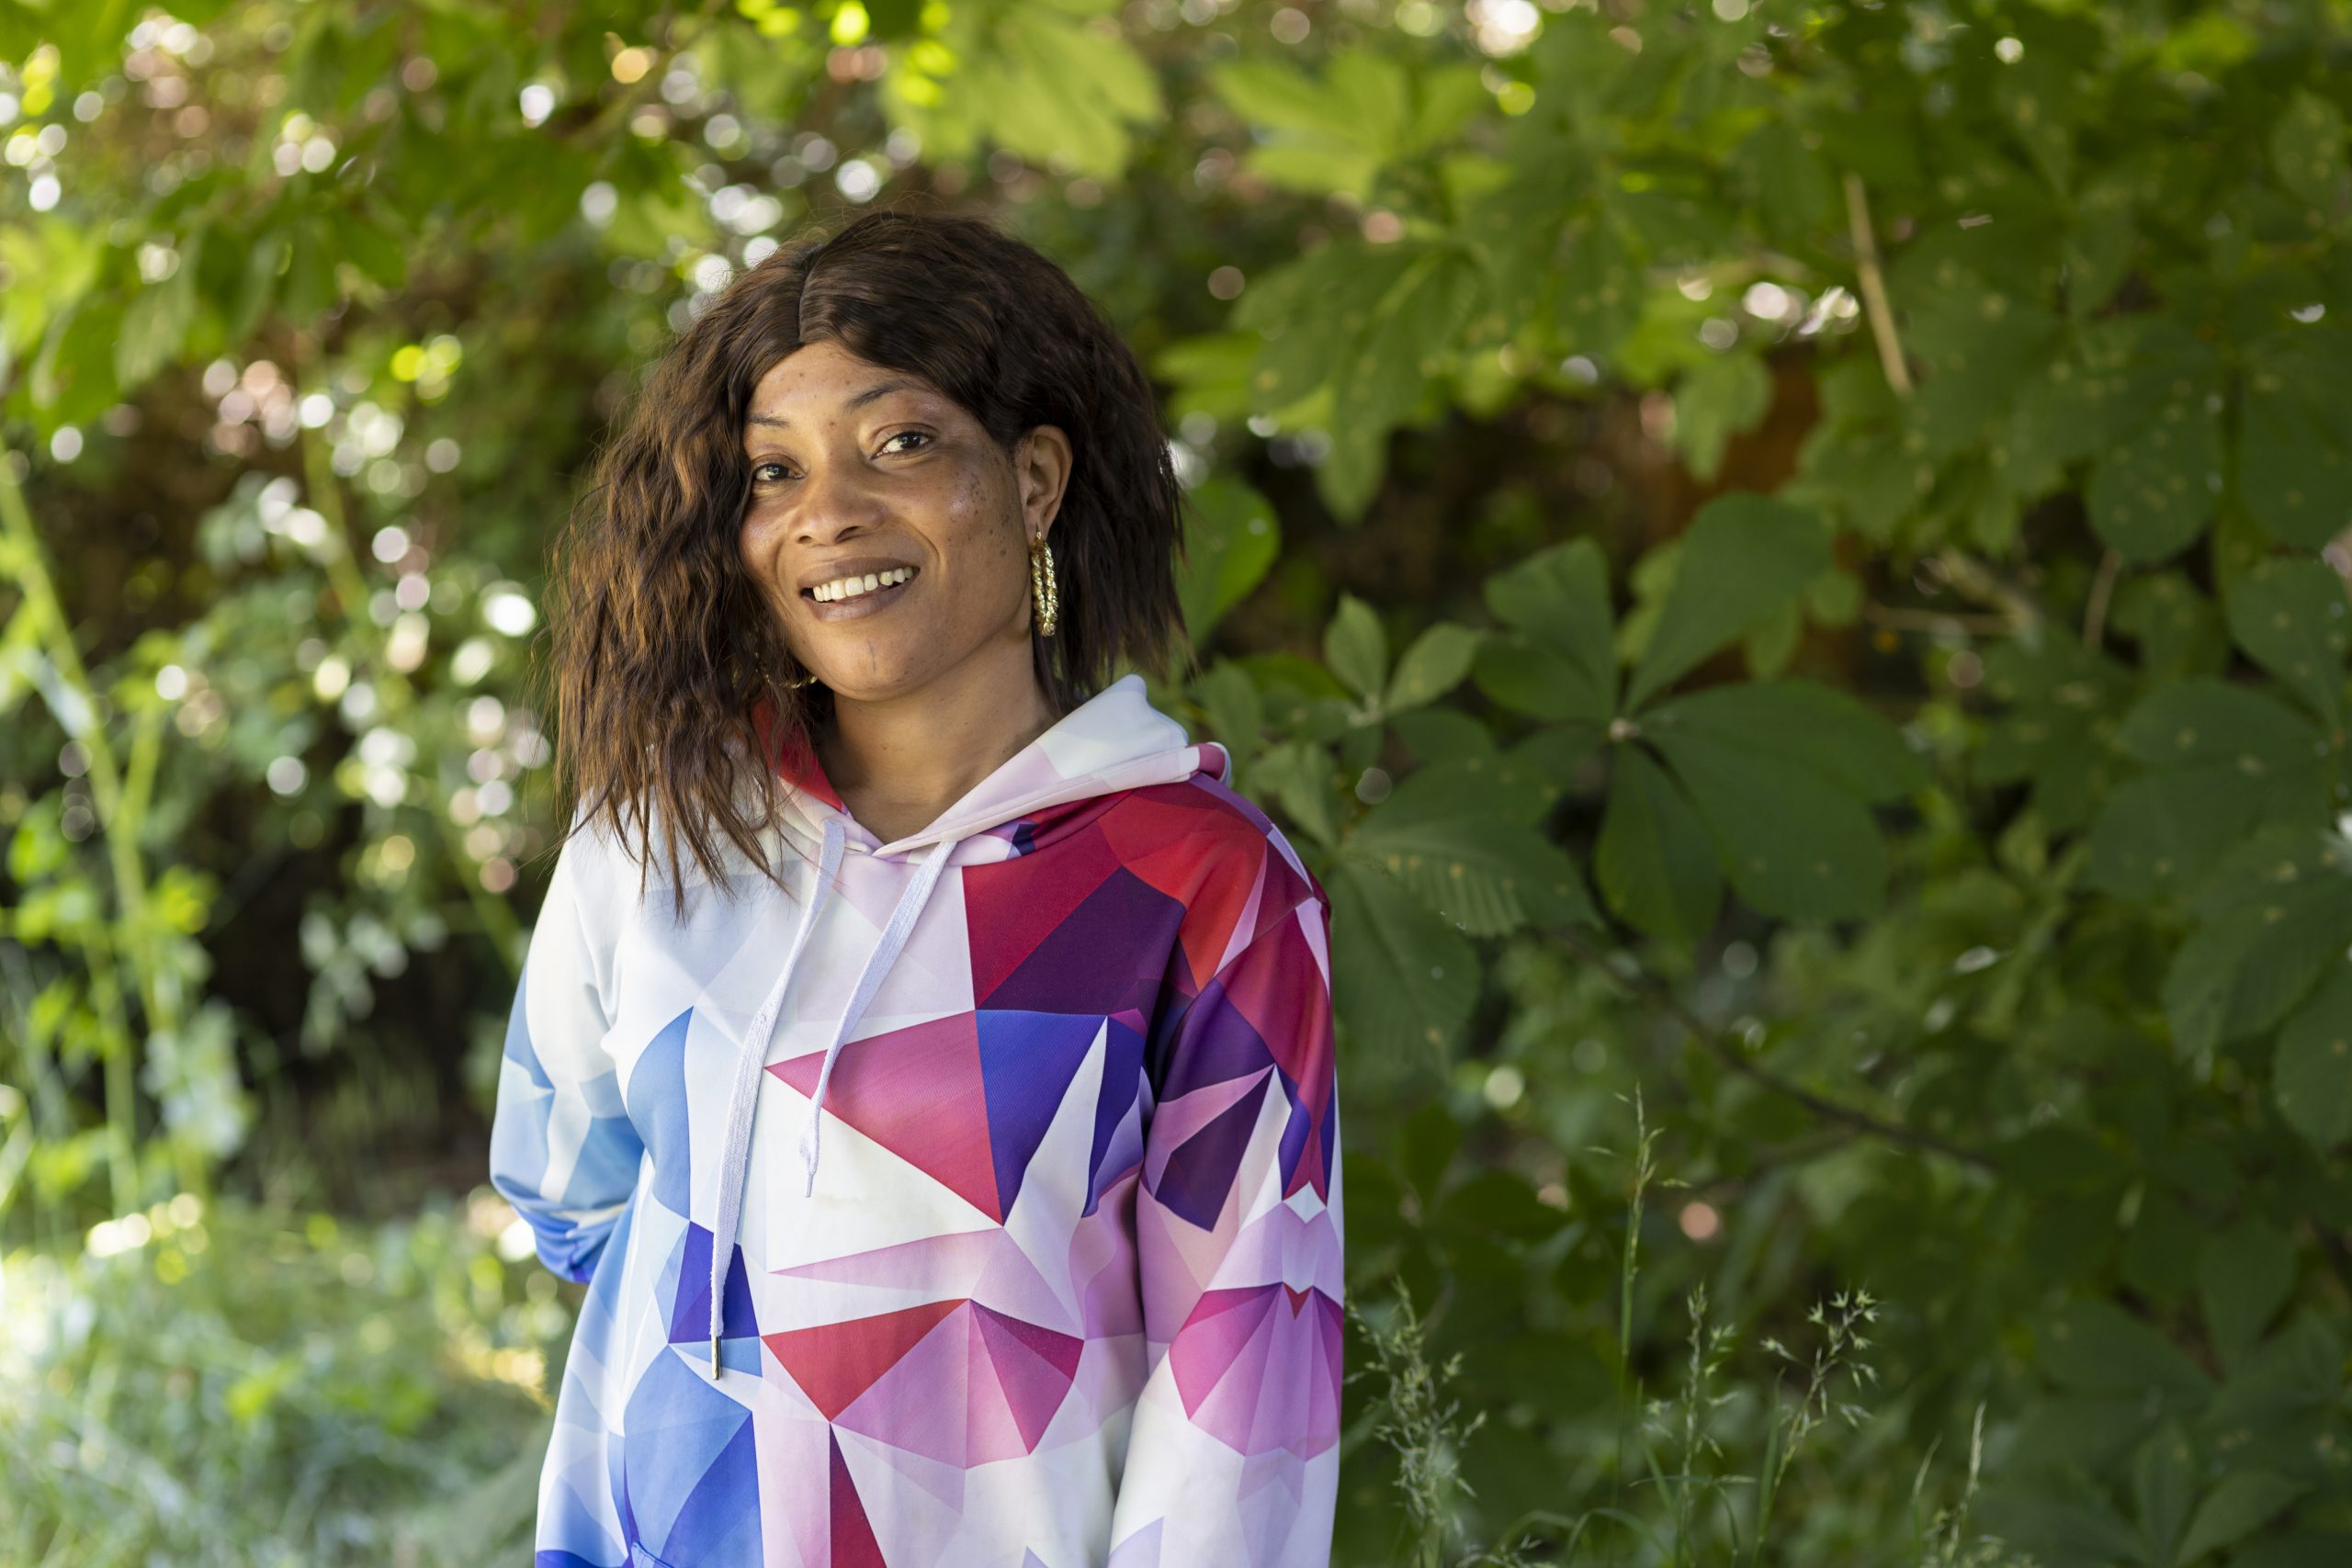 A smiling woman in a white hoodie with colourful geometric patterns in purple, pink and blue, standing in front of a tree.